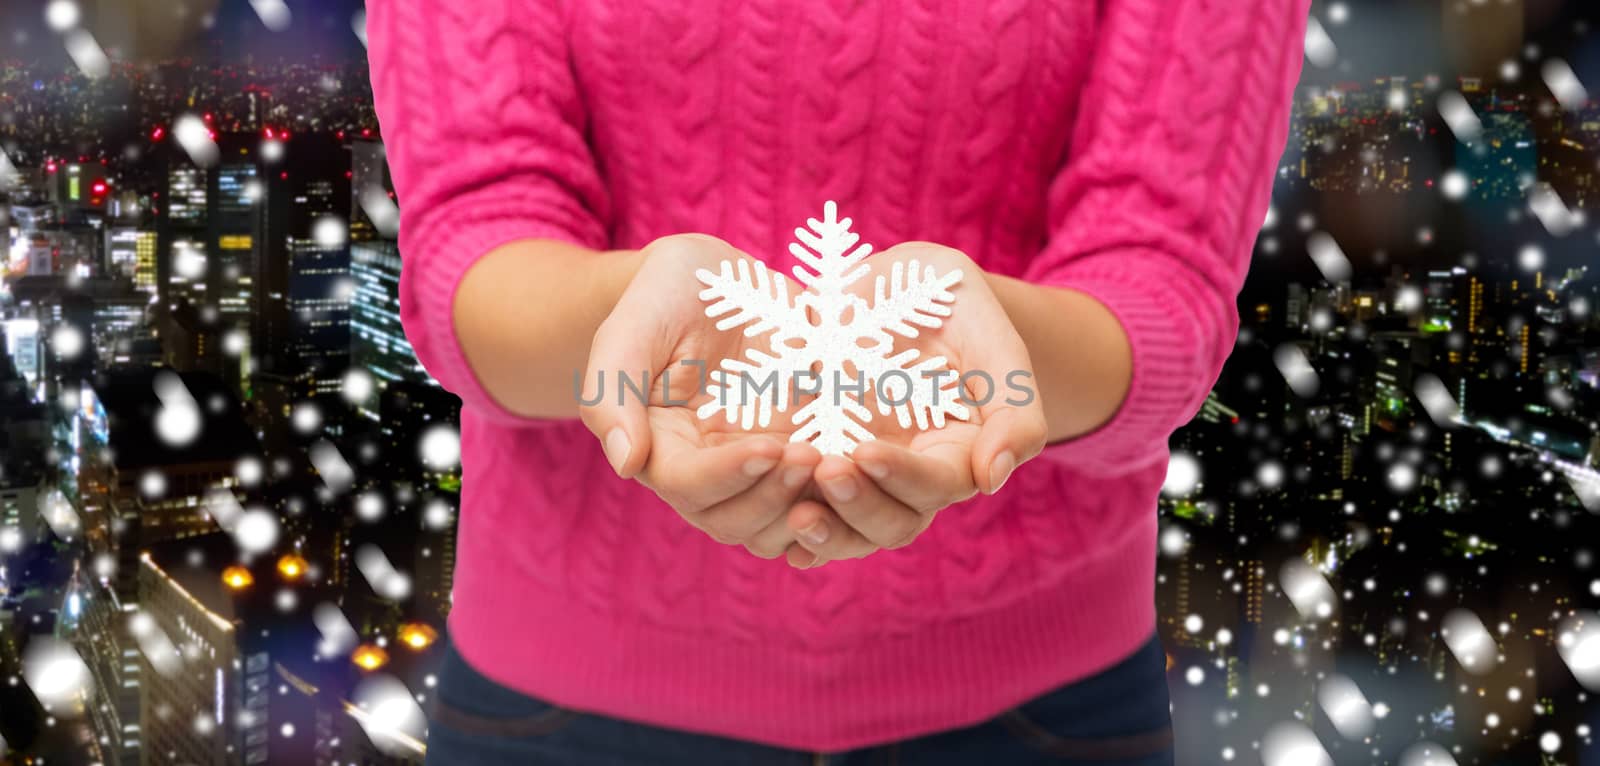 christmas, winter, holidays and people concept - close up of woman in pink sweater holding snowflake decoration over snowy night city background